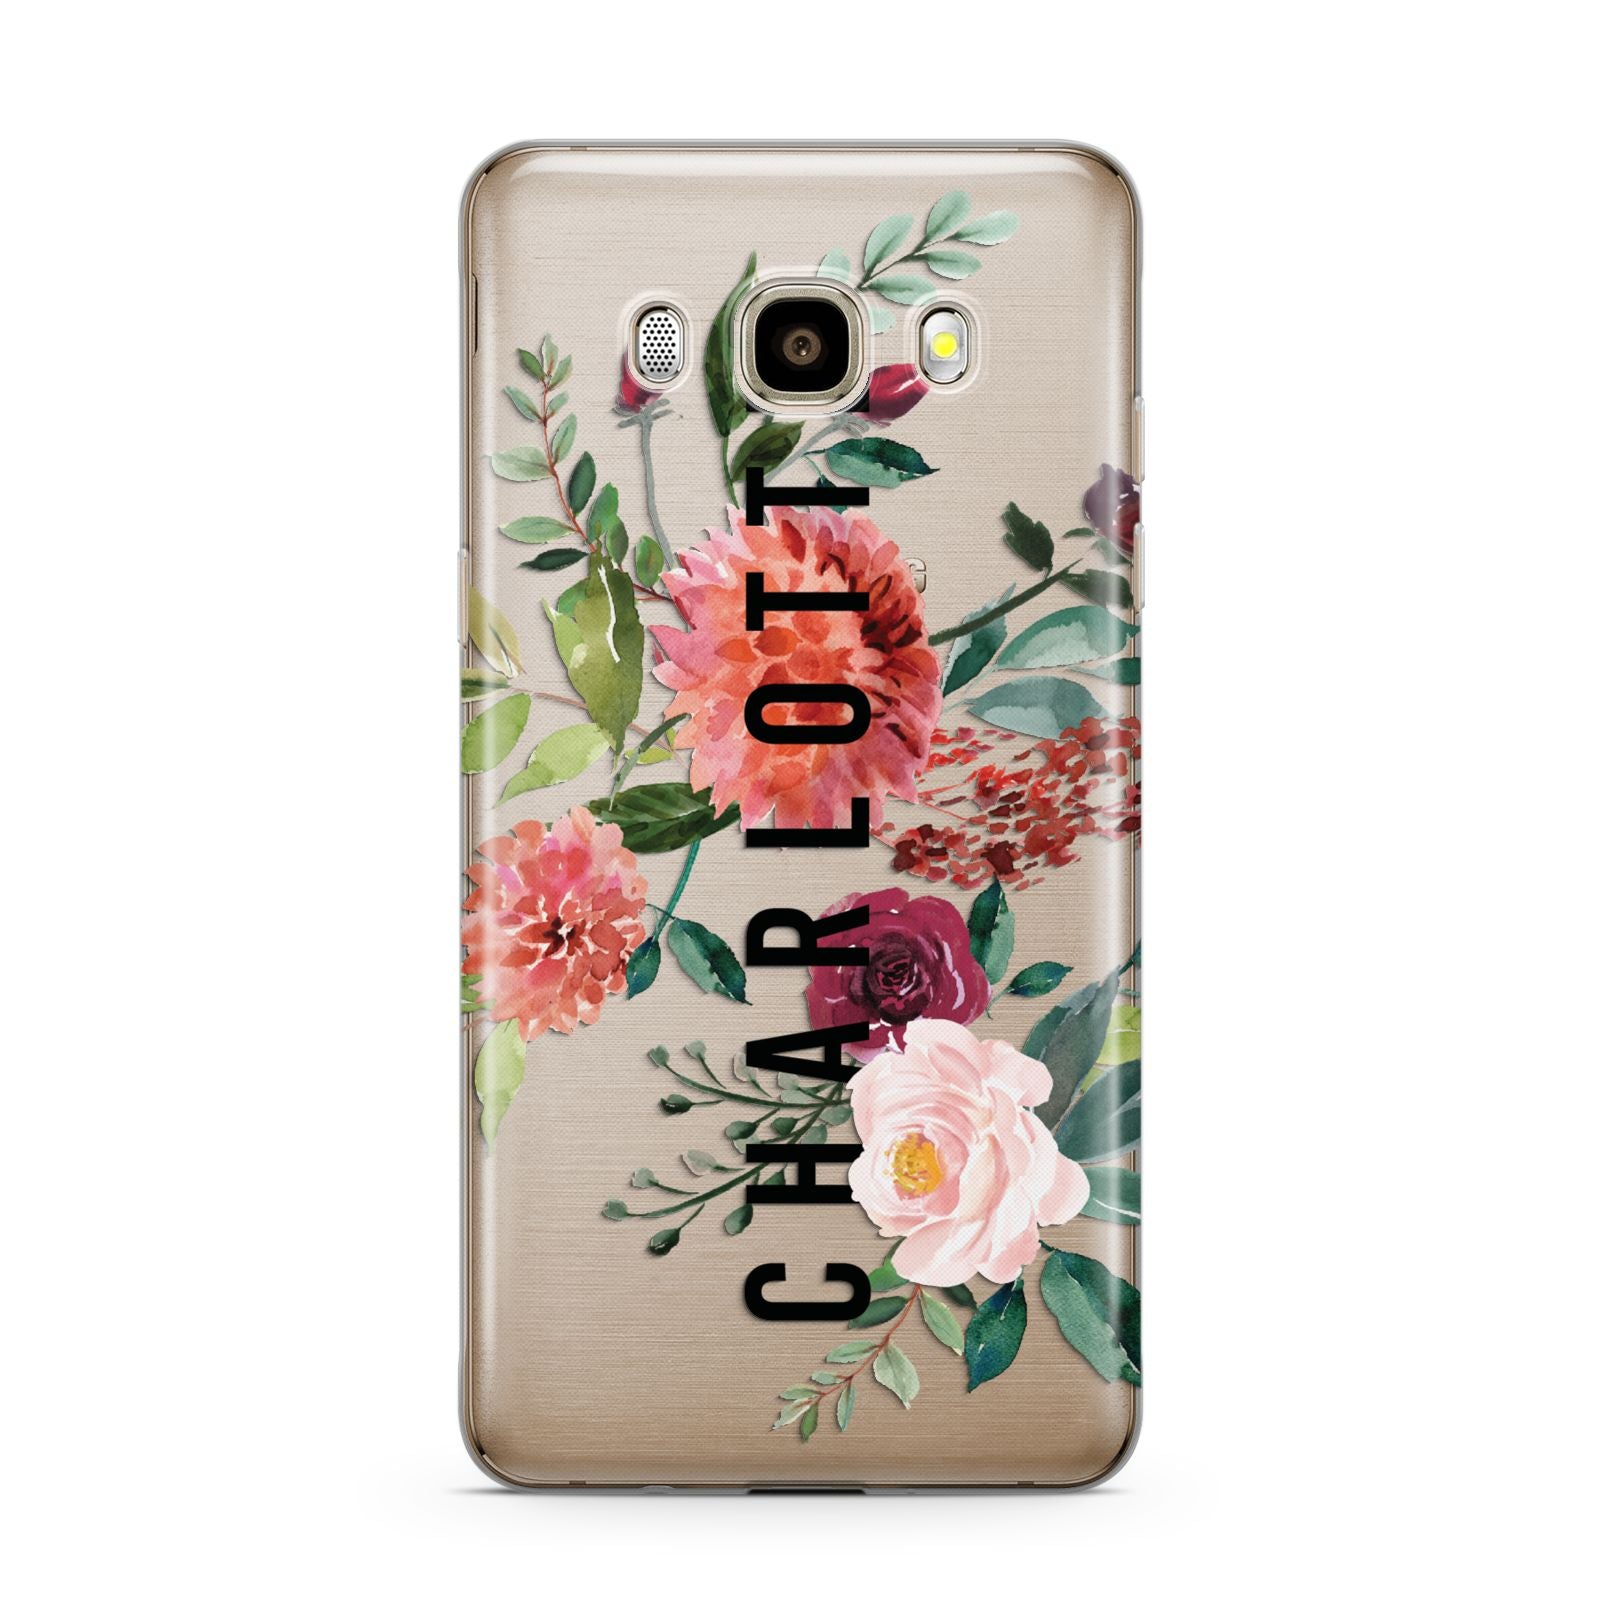 Personalised Side Name Clear Floral Samsung Galaxy J7 2016 Case on gold phone